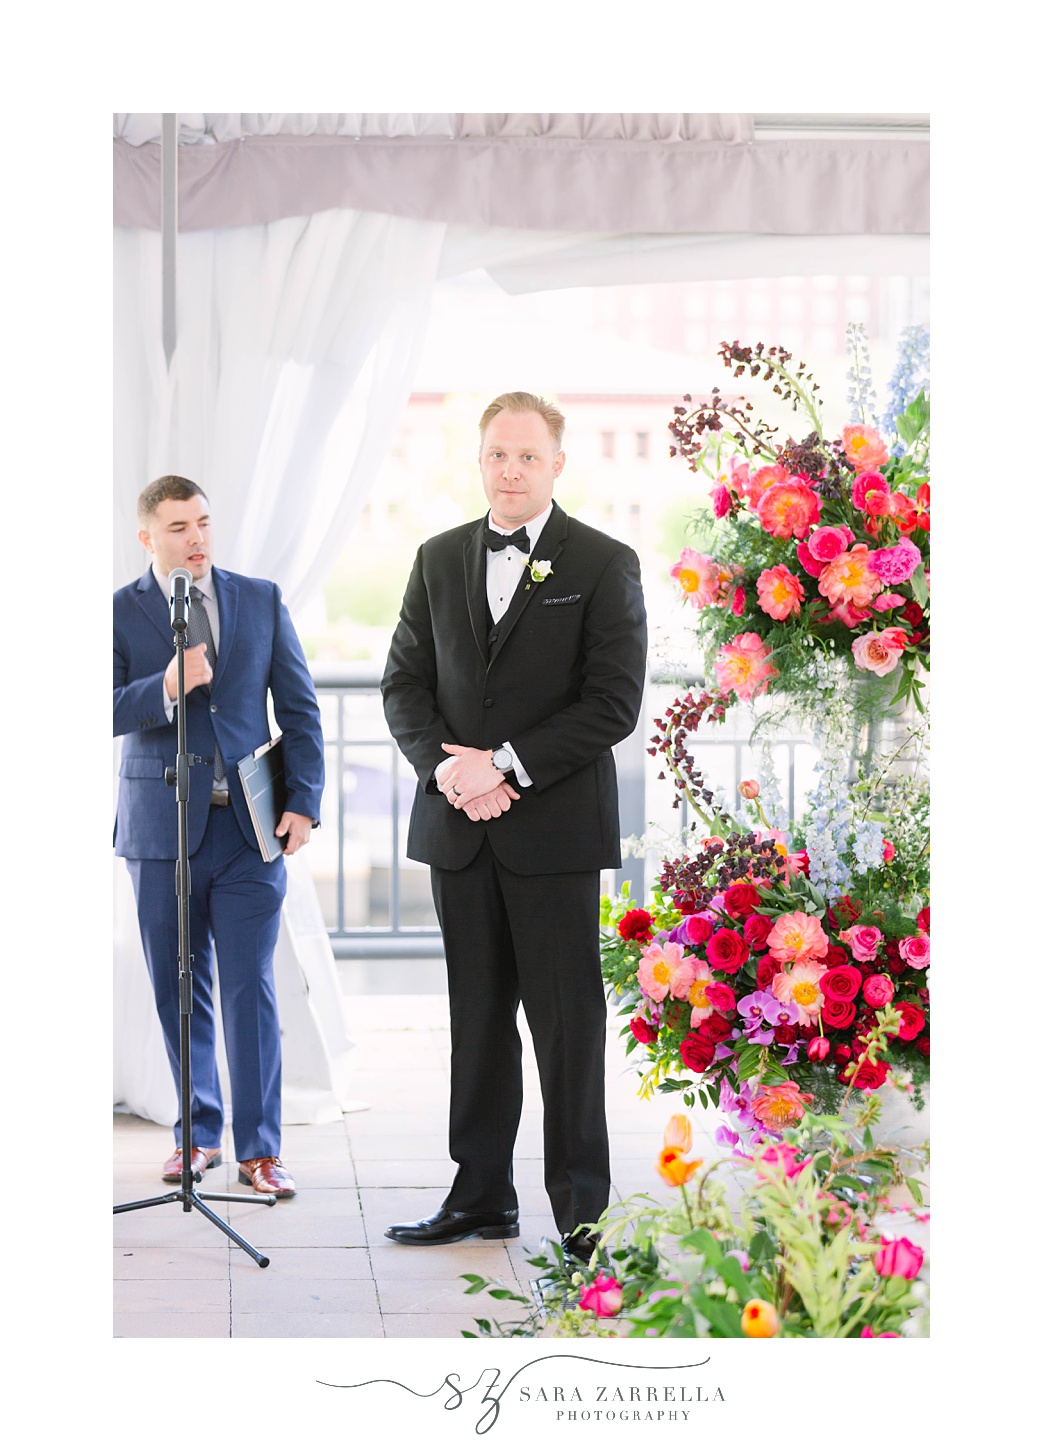 groom stands at alter by floral display in Skyline at Waterplace